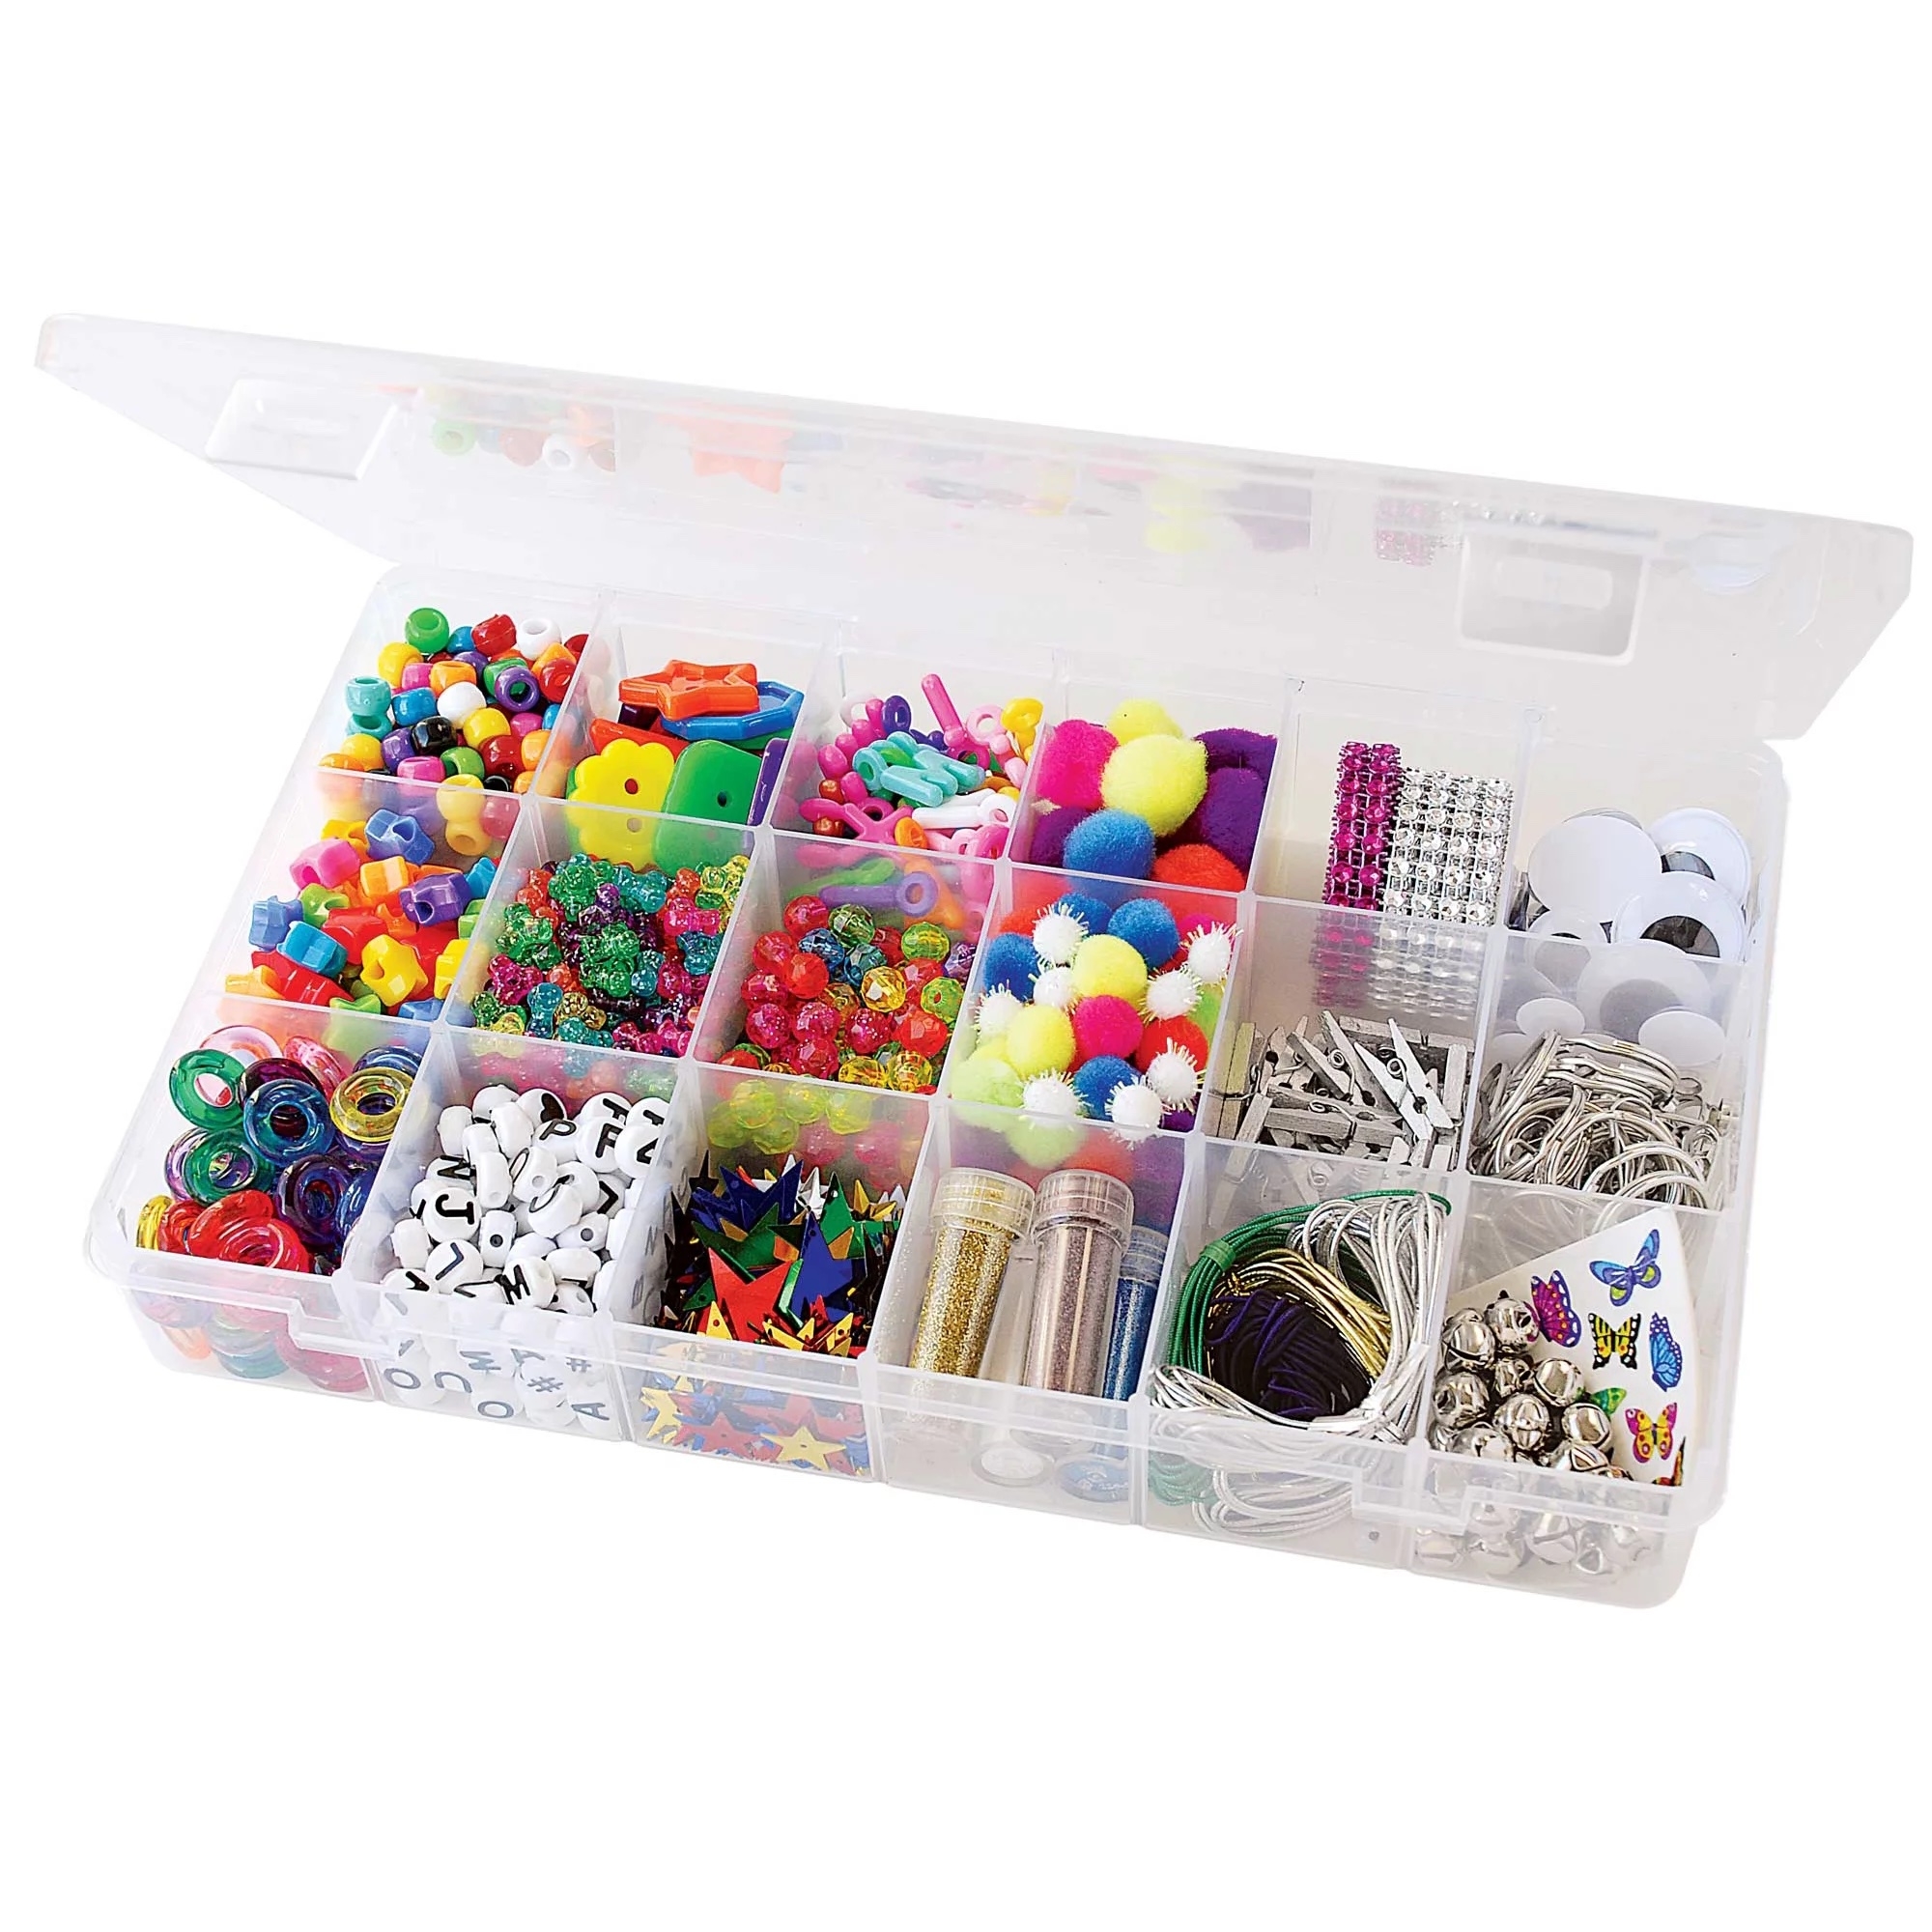 organizer filled with various beads, string, stickers, etc.